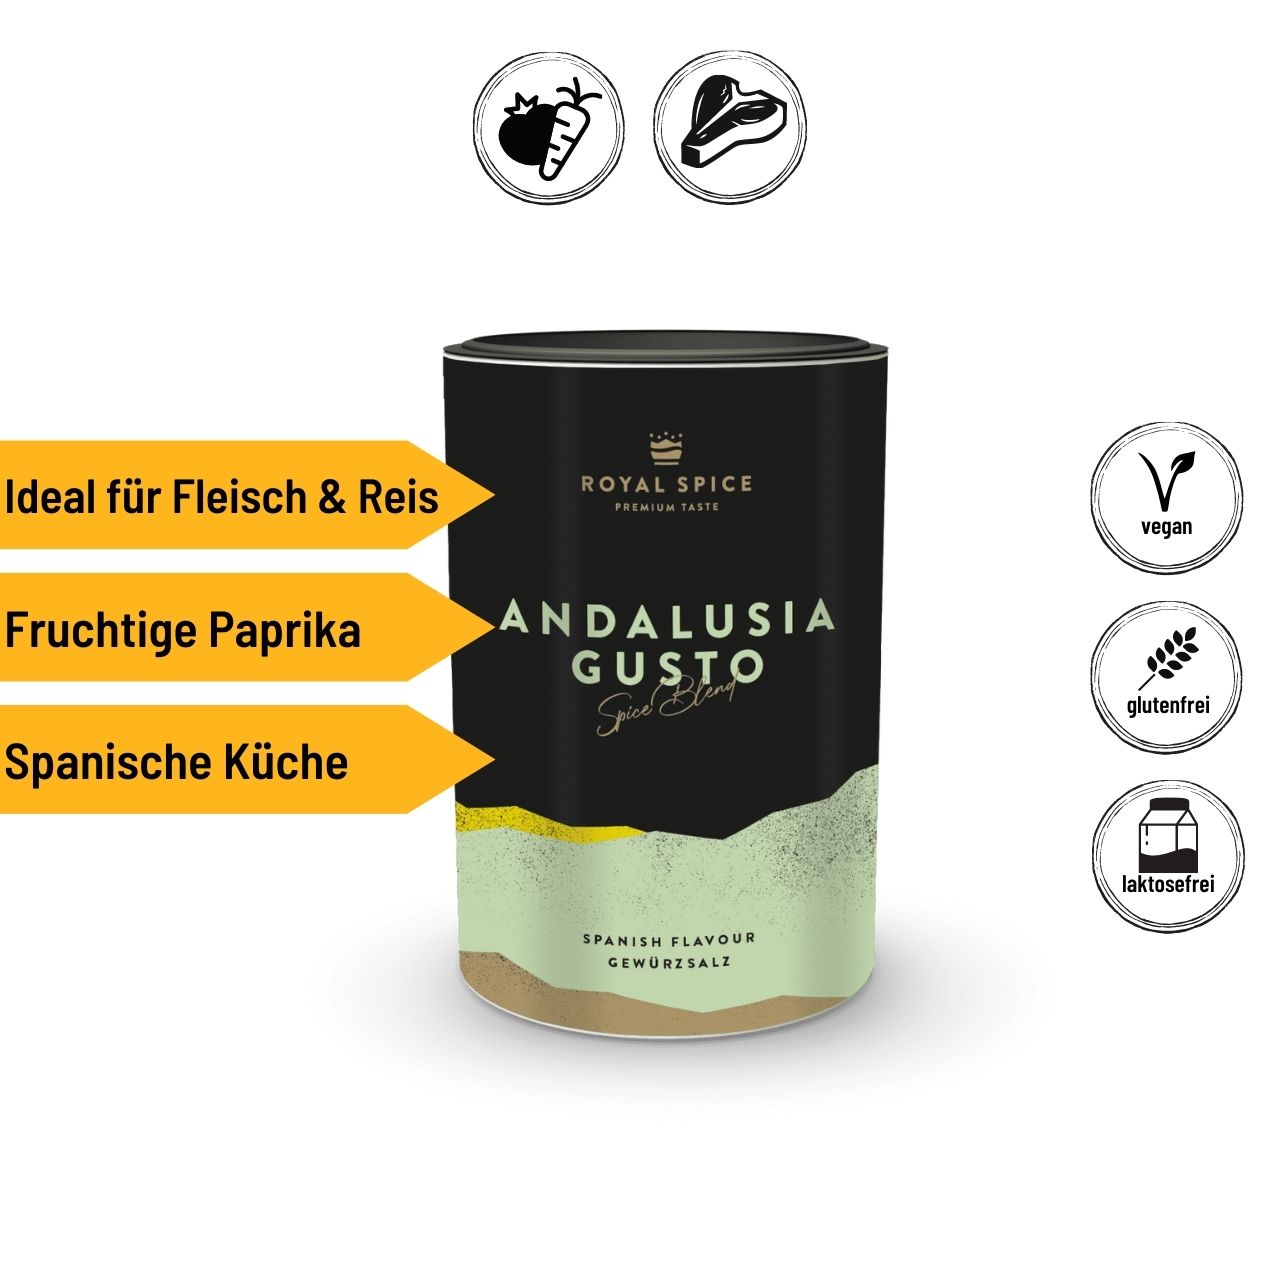 Royal Spice - Andalusia Gusto, 120 g